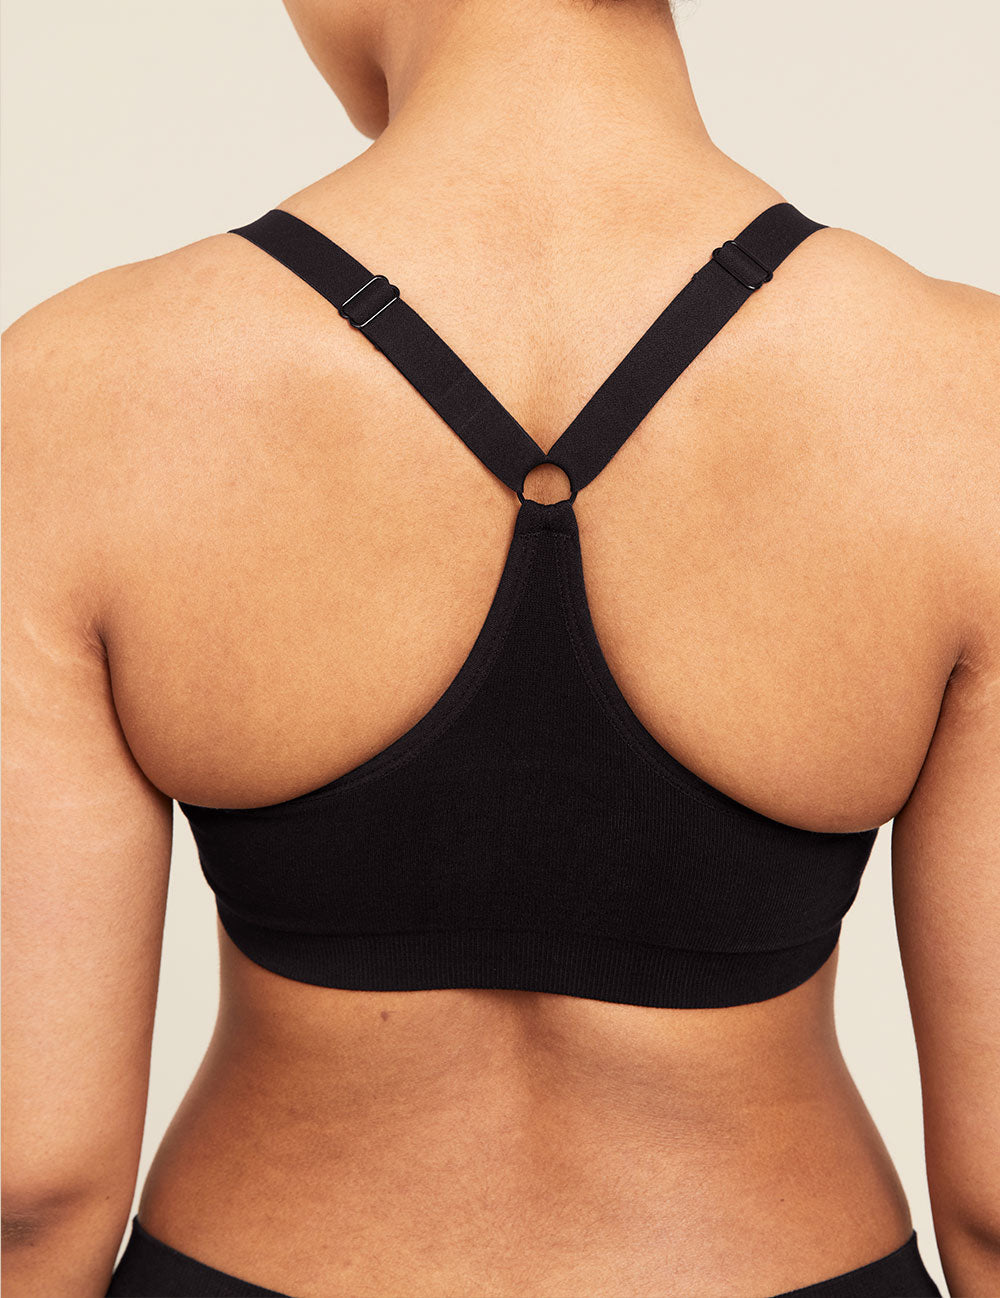 NEW. Introducing our Full Bust Bra - Boody UK